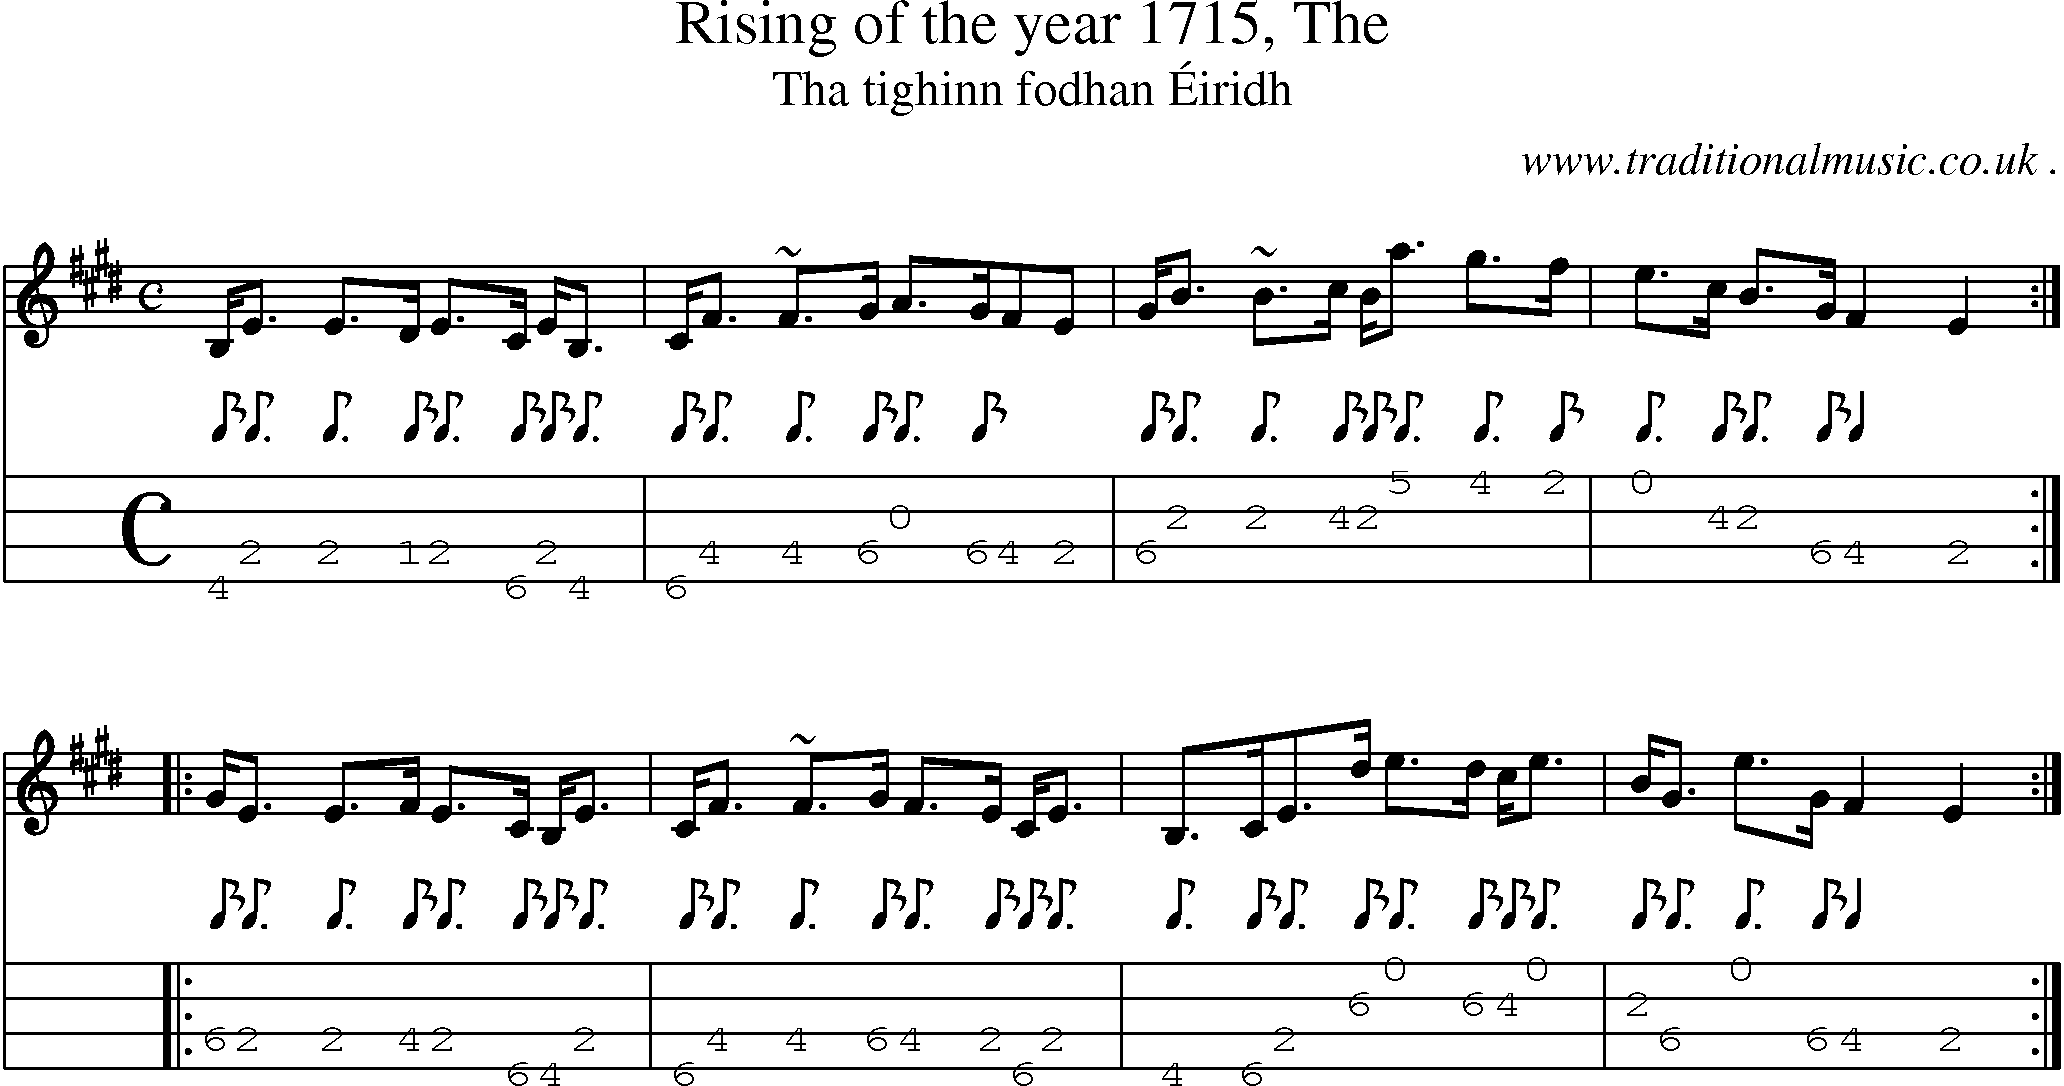 Sheet-music  score, Chords and Mandolin Tabs for Rising Of The Year 1715 The